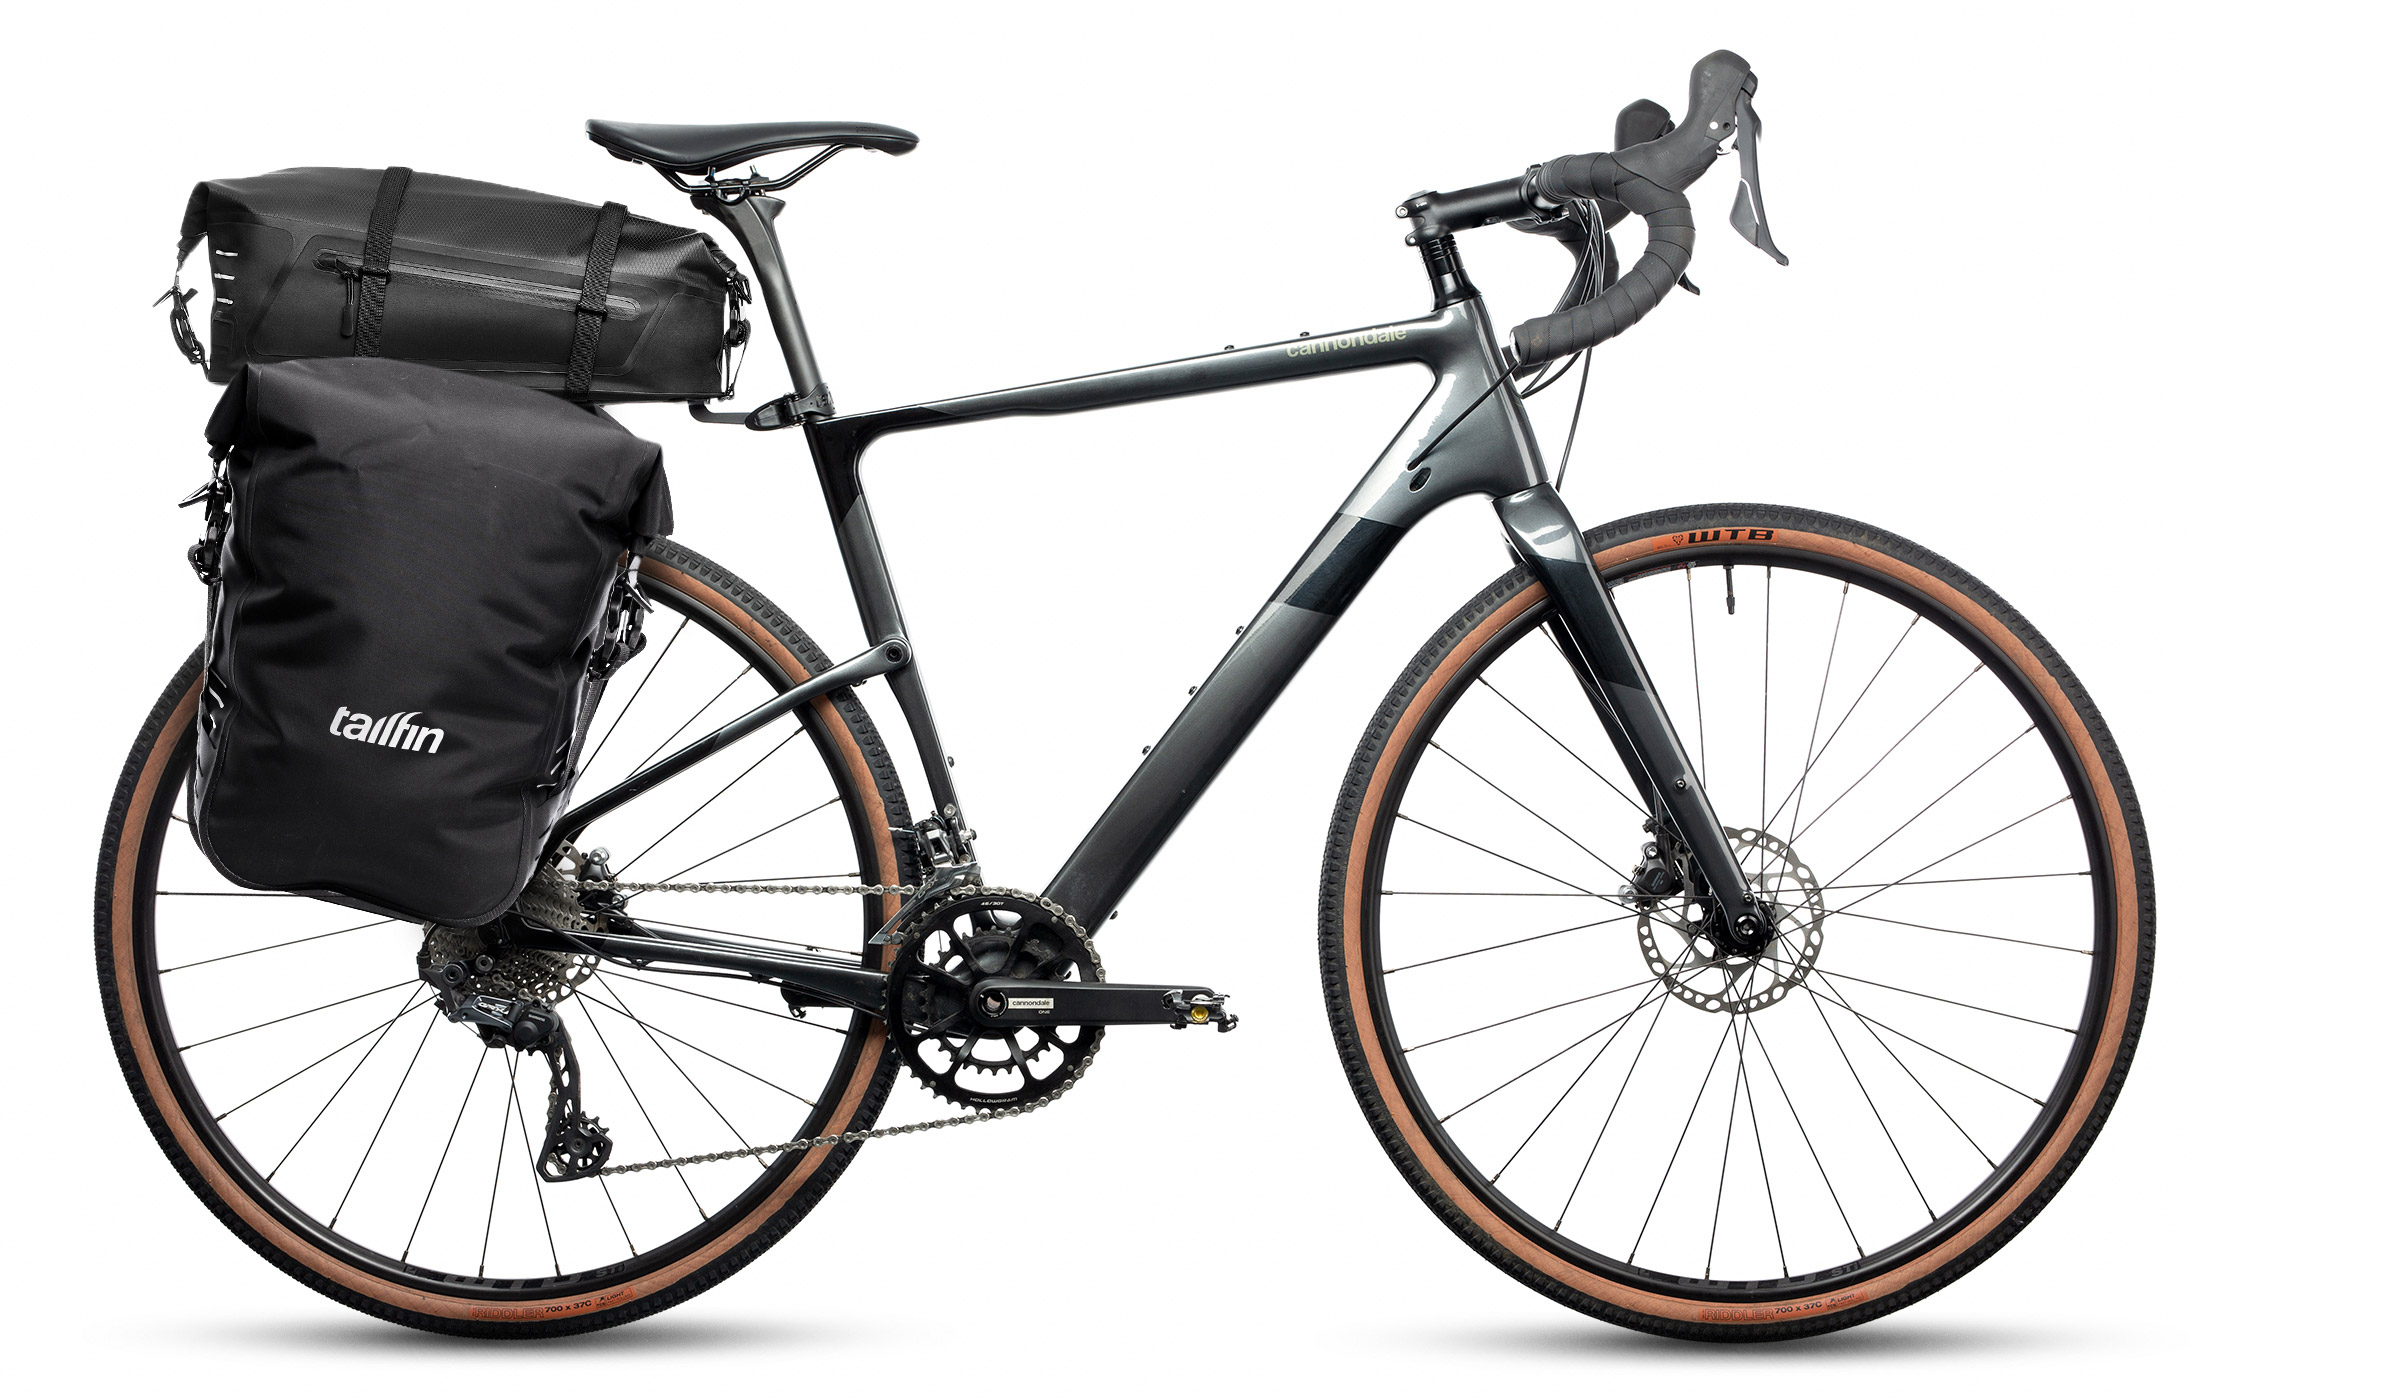 rack with panniers